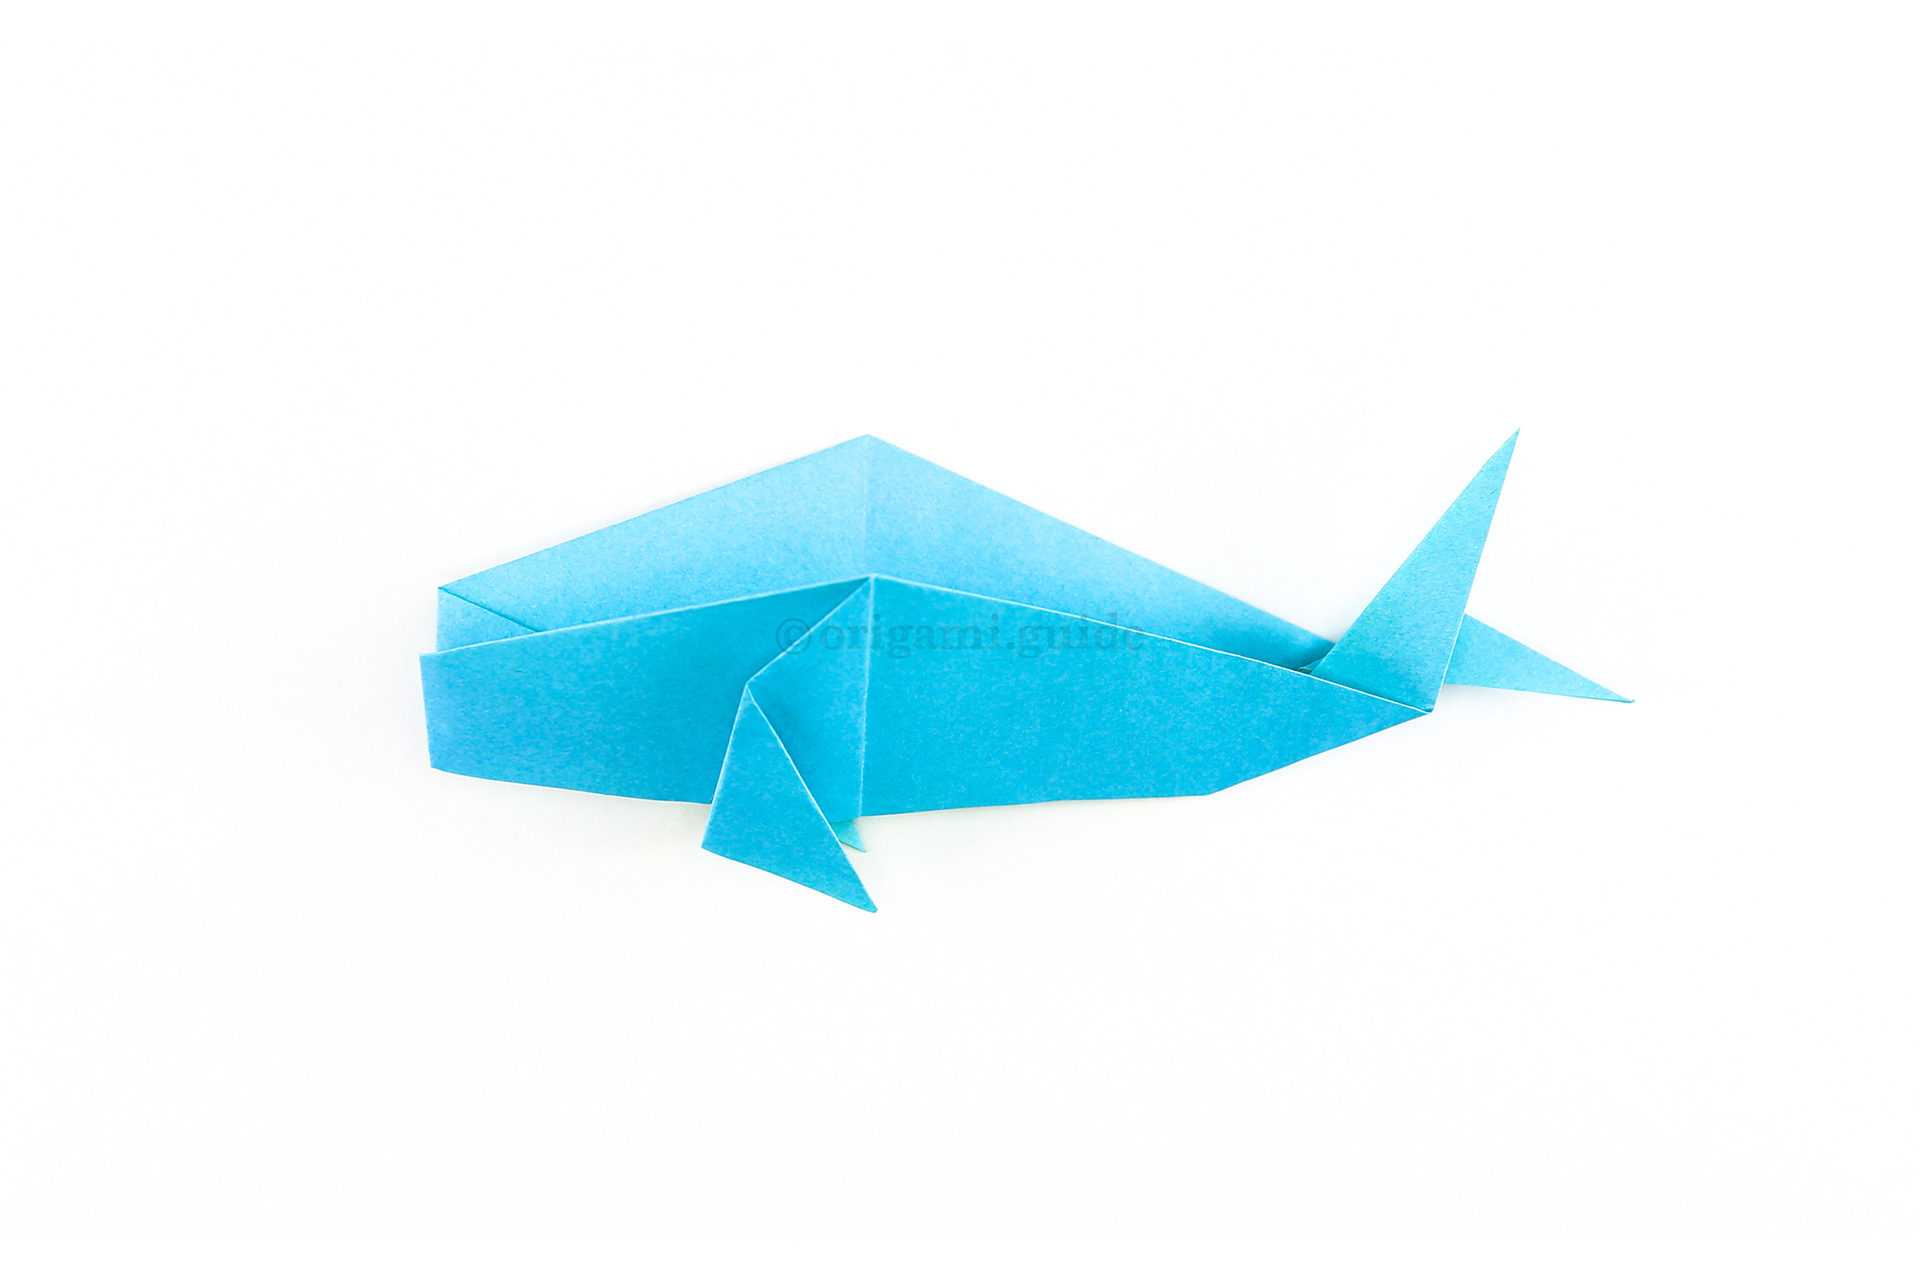 Start by making an origami whale. Click here for the tutorial.